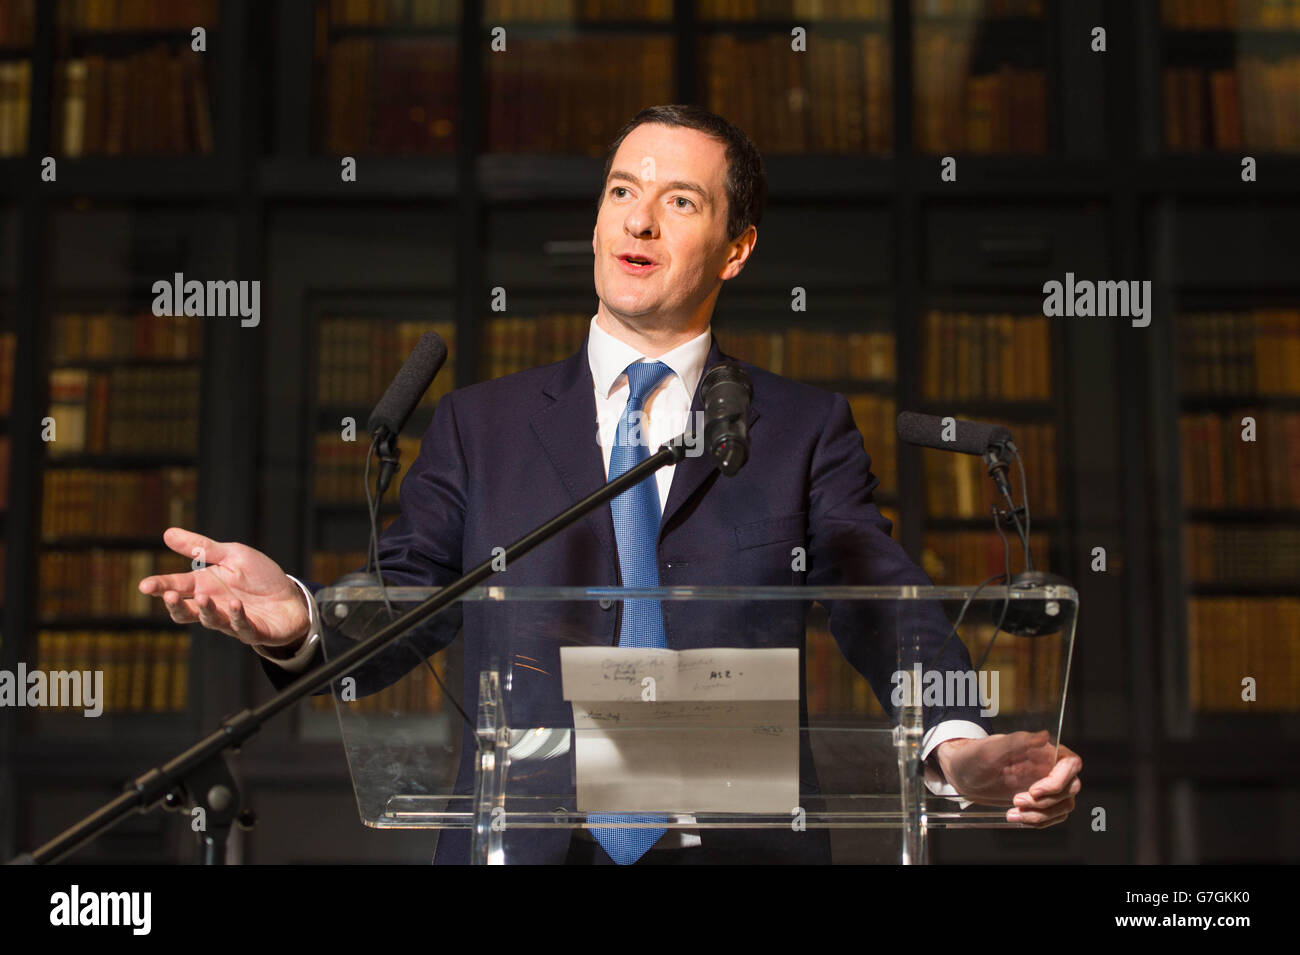 Chancellor of the Exchequer George Osborne speaks at the launch of the Knowledge Quarter, at the British Library in central London. Stock Photo